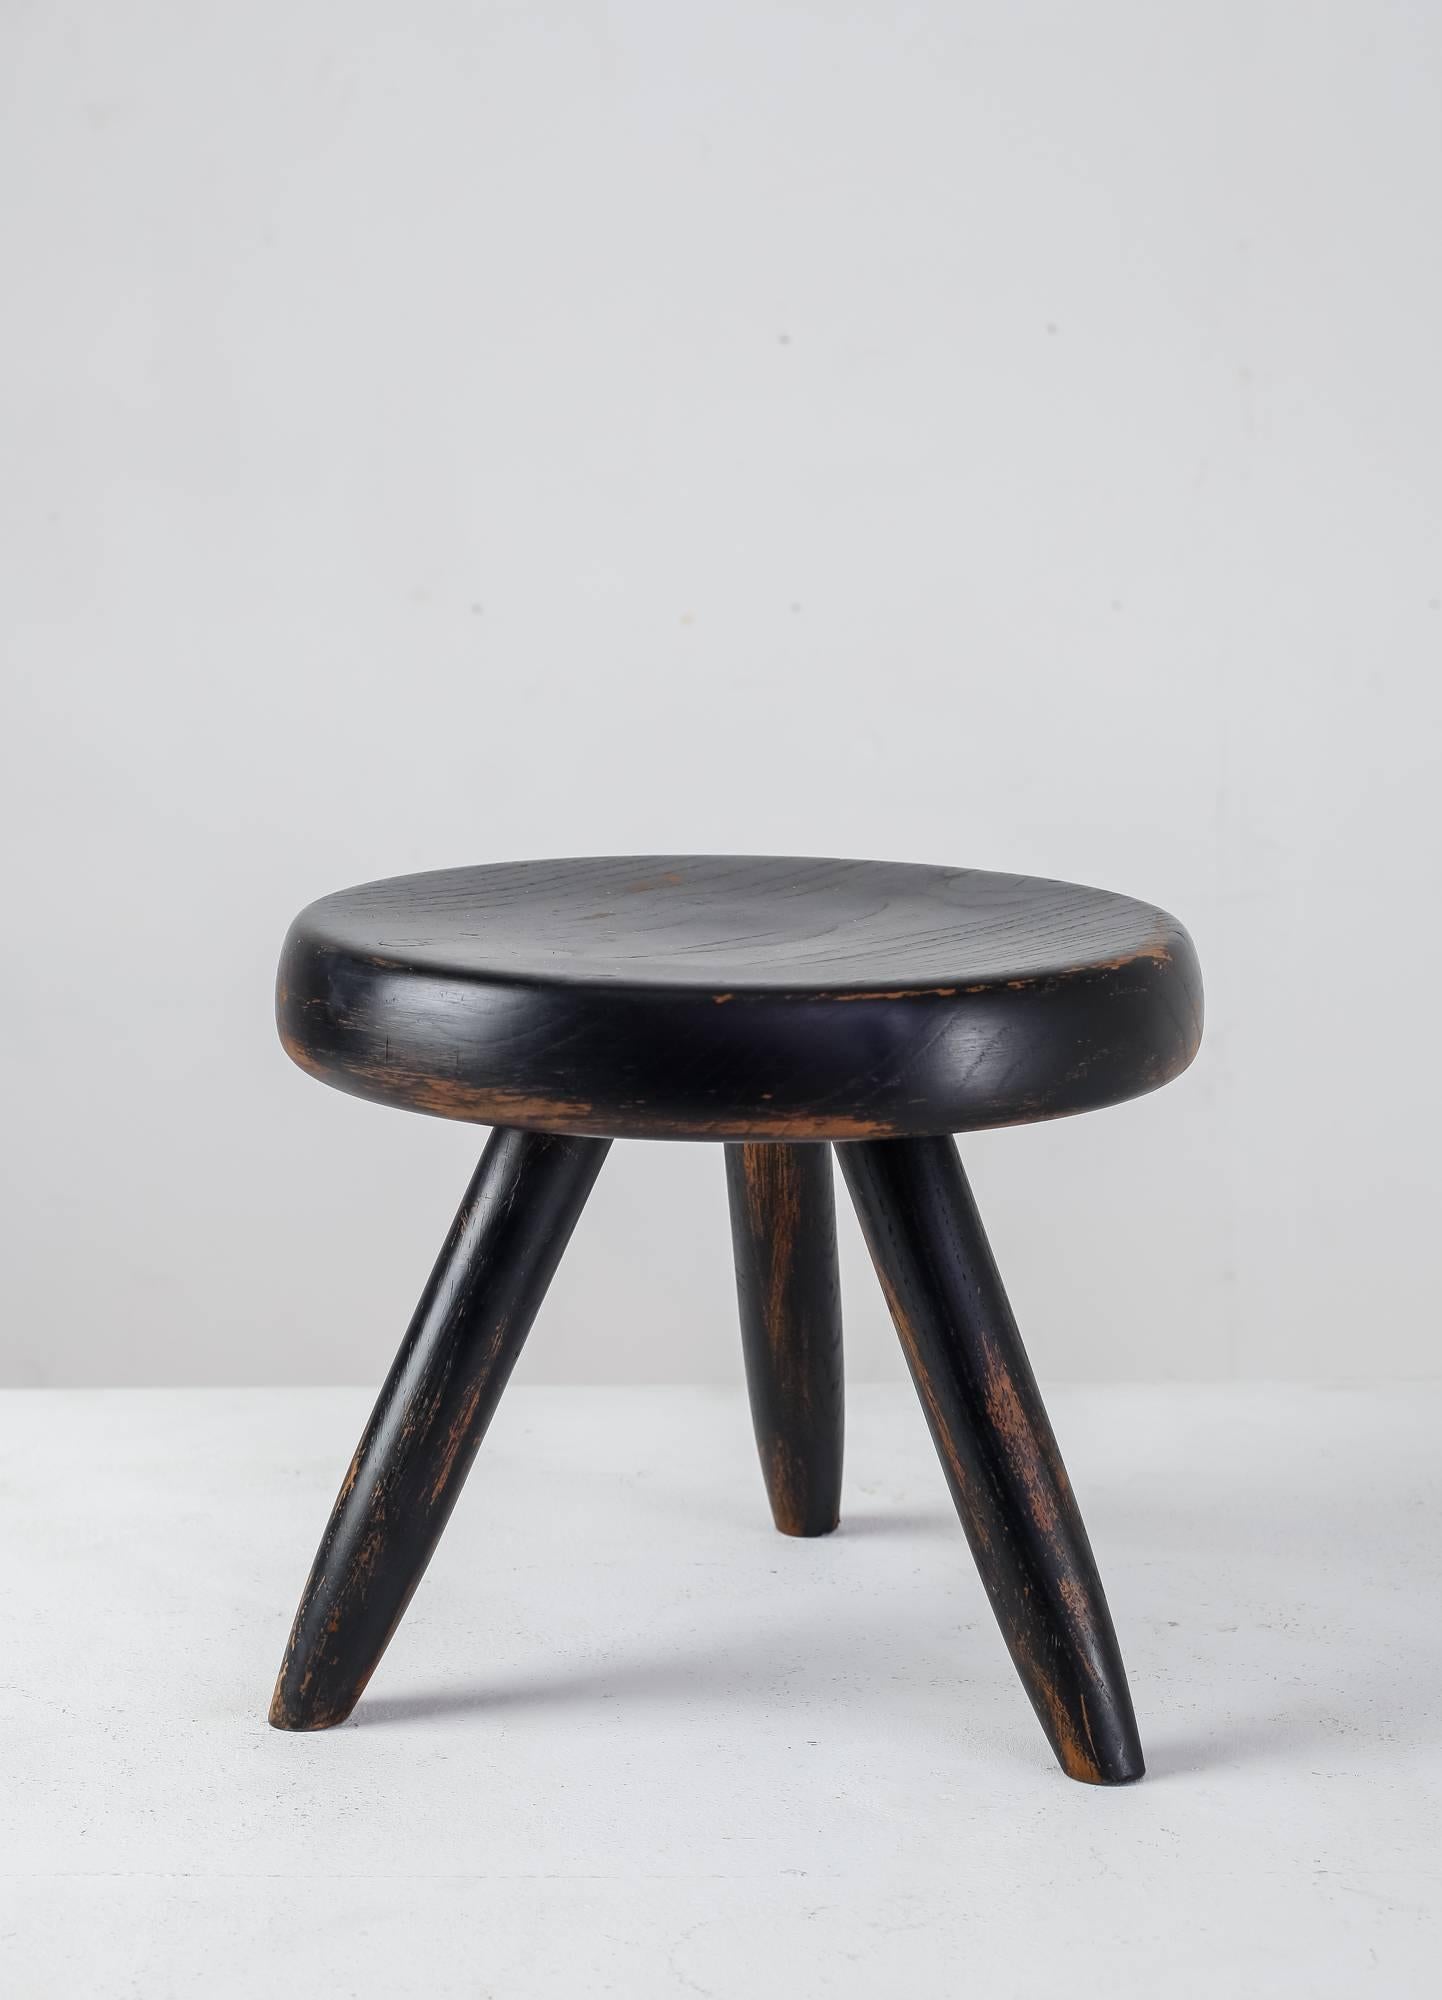 A low tripod stool in ebonized ash by Charlotte Perriand, with a great and strong patina.

The first tripod stool of this type by Perriand was designed in 1947 and produced by Georges Blanchon’s Bureau Central de Construction. In 1956 Perriand